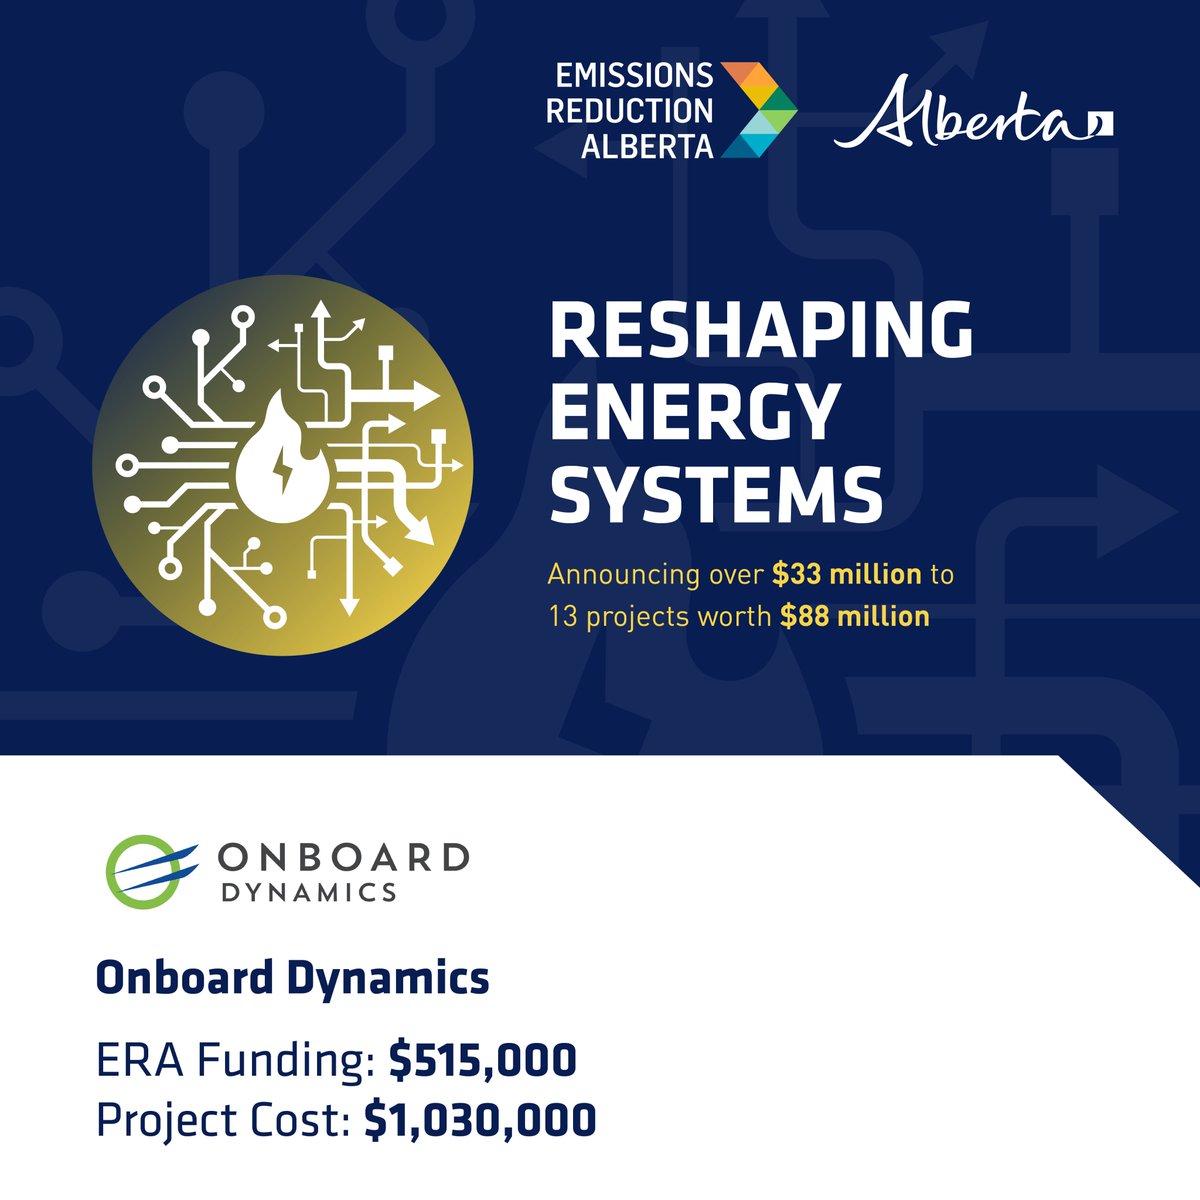 #ReshapingEnergySystems Spotlight: @OnboardDynamics ERA’s $500K investment in Onboard Dynamics will help the company launch a system in Alberta for capturing and recovering natural gas during pipeline operations. #ERAFunded @YourAlberta @rebeccakschulz